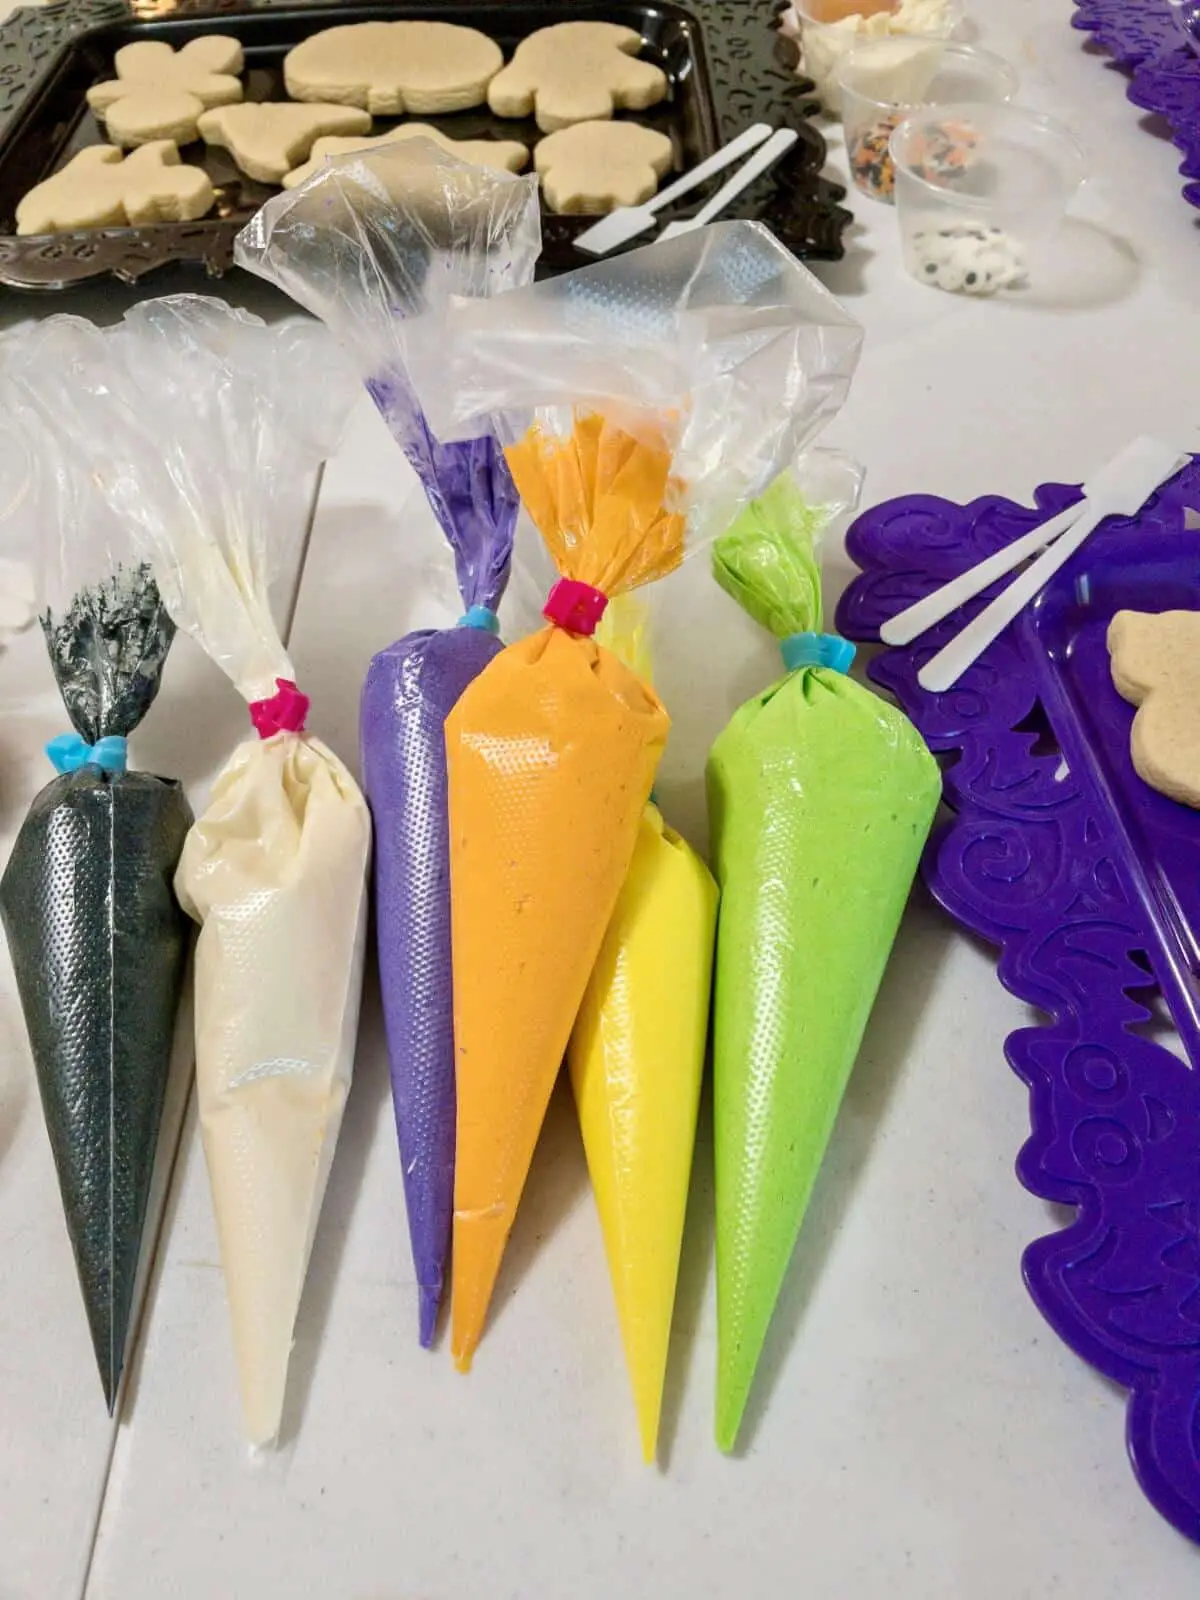 Several disposable piping bags filled with colorful buttercream frosting.